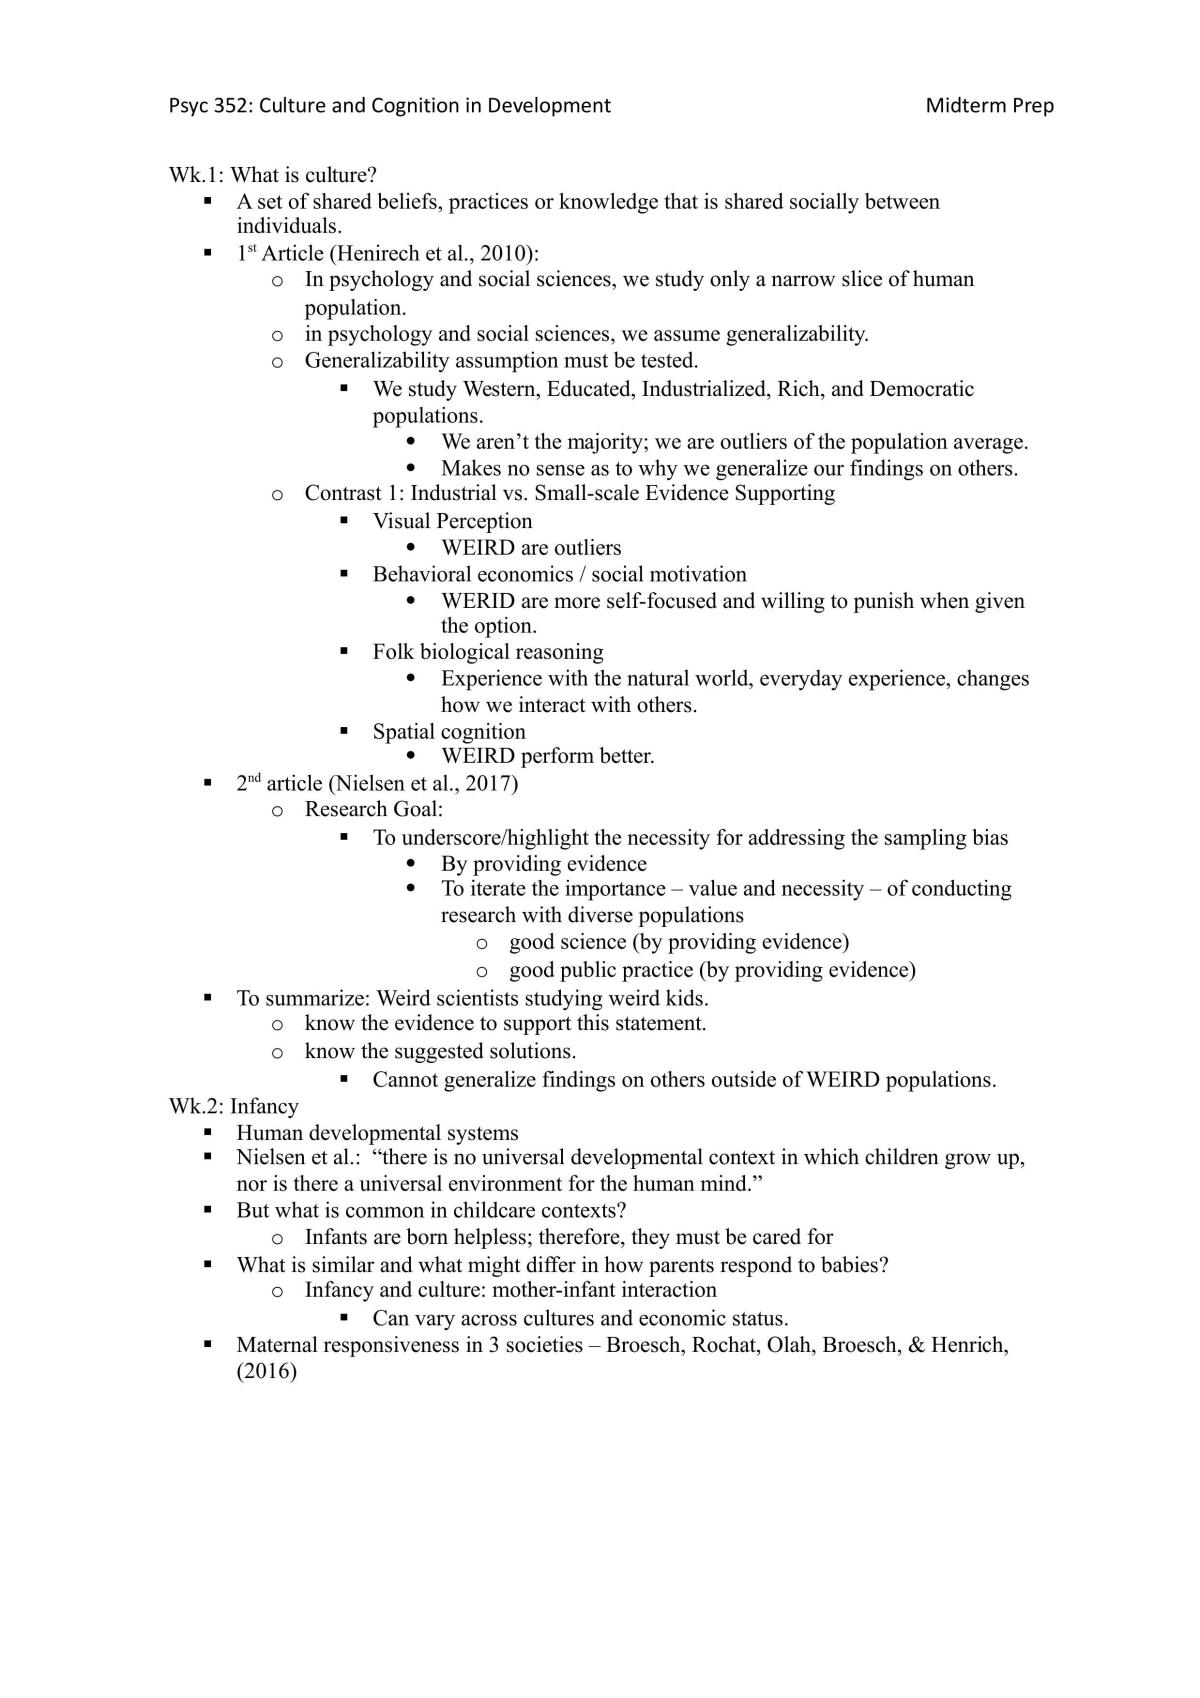 Midterm Exam Study Guide - Page 1